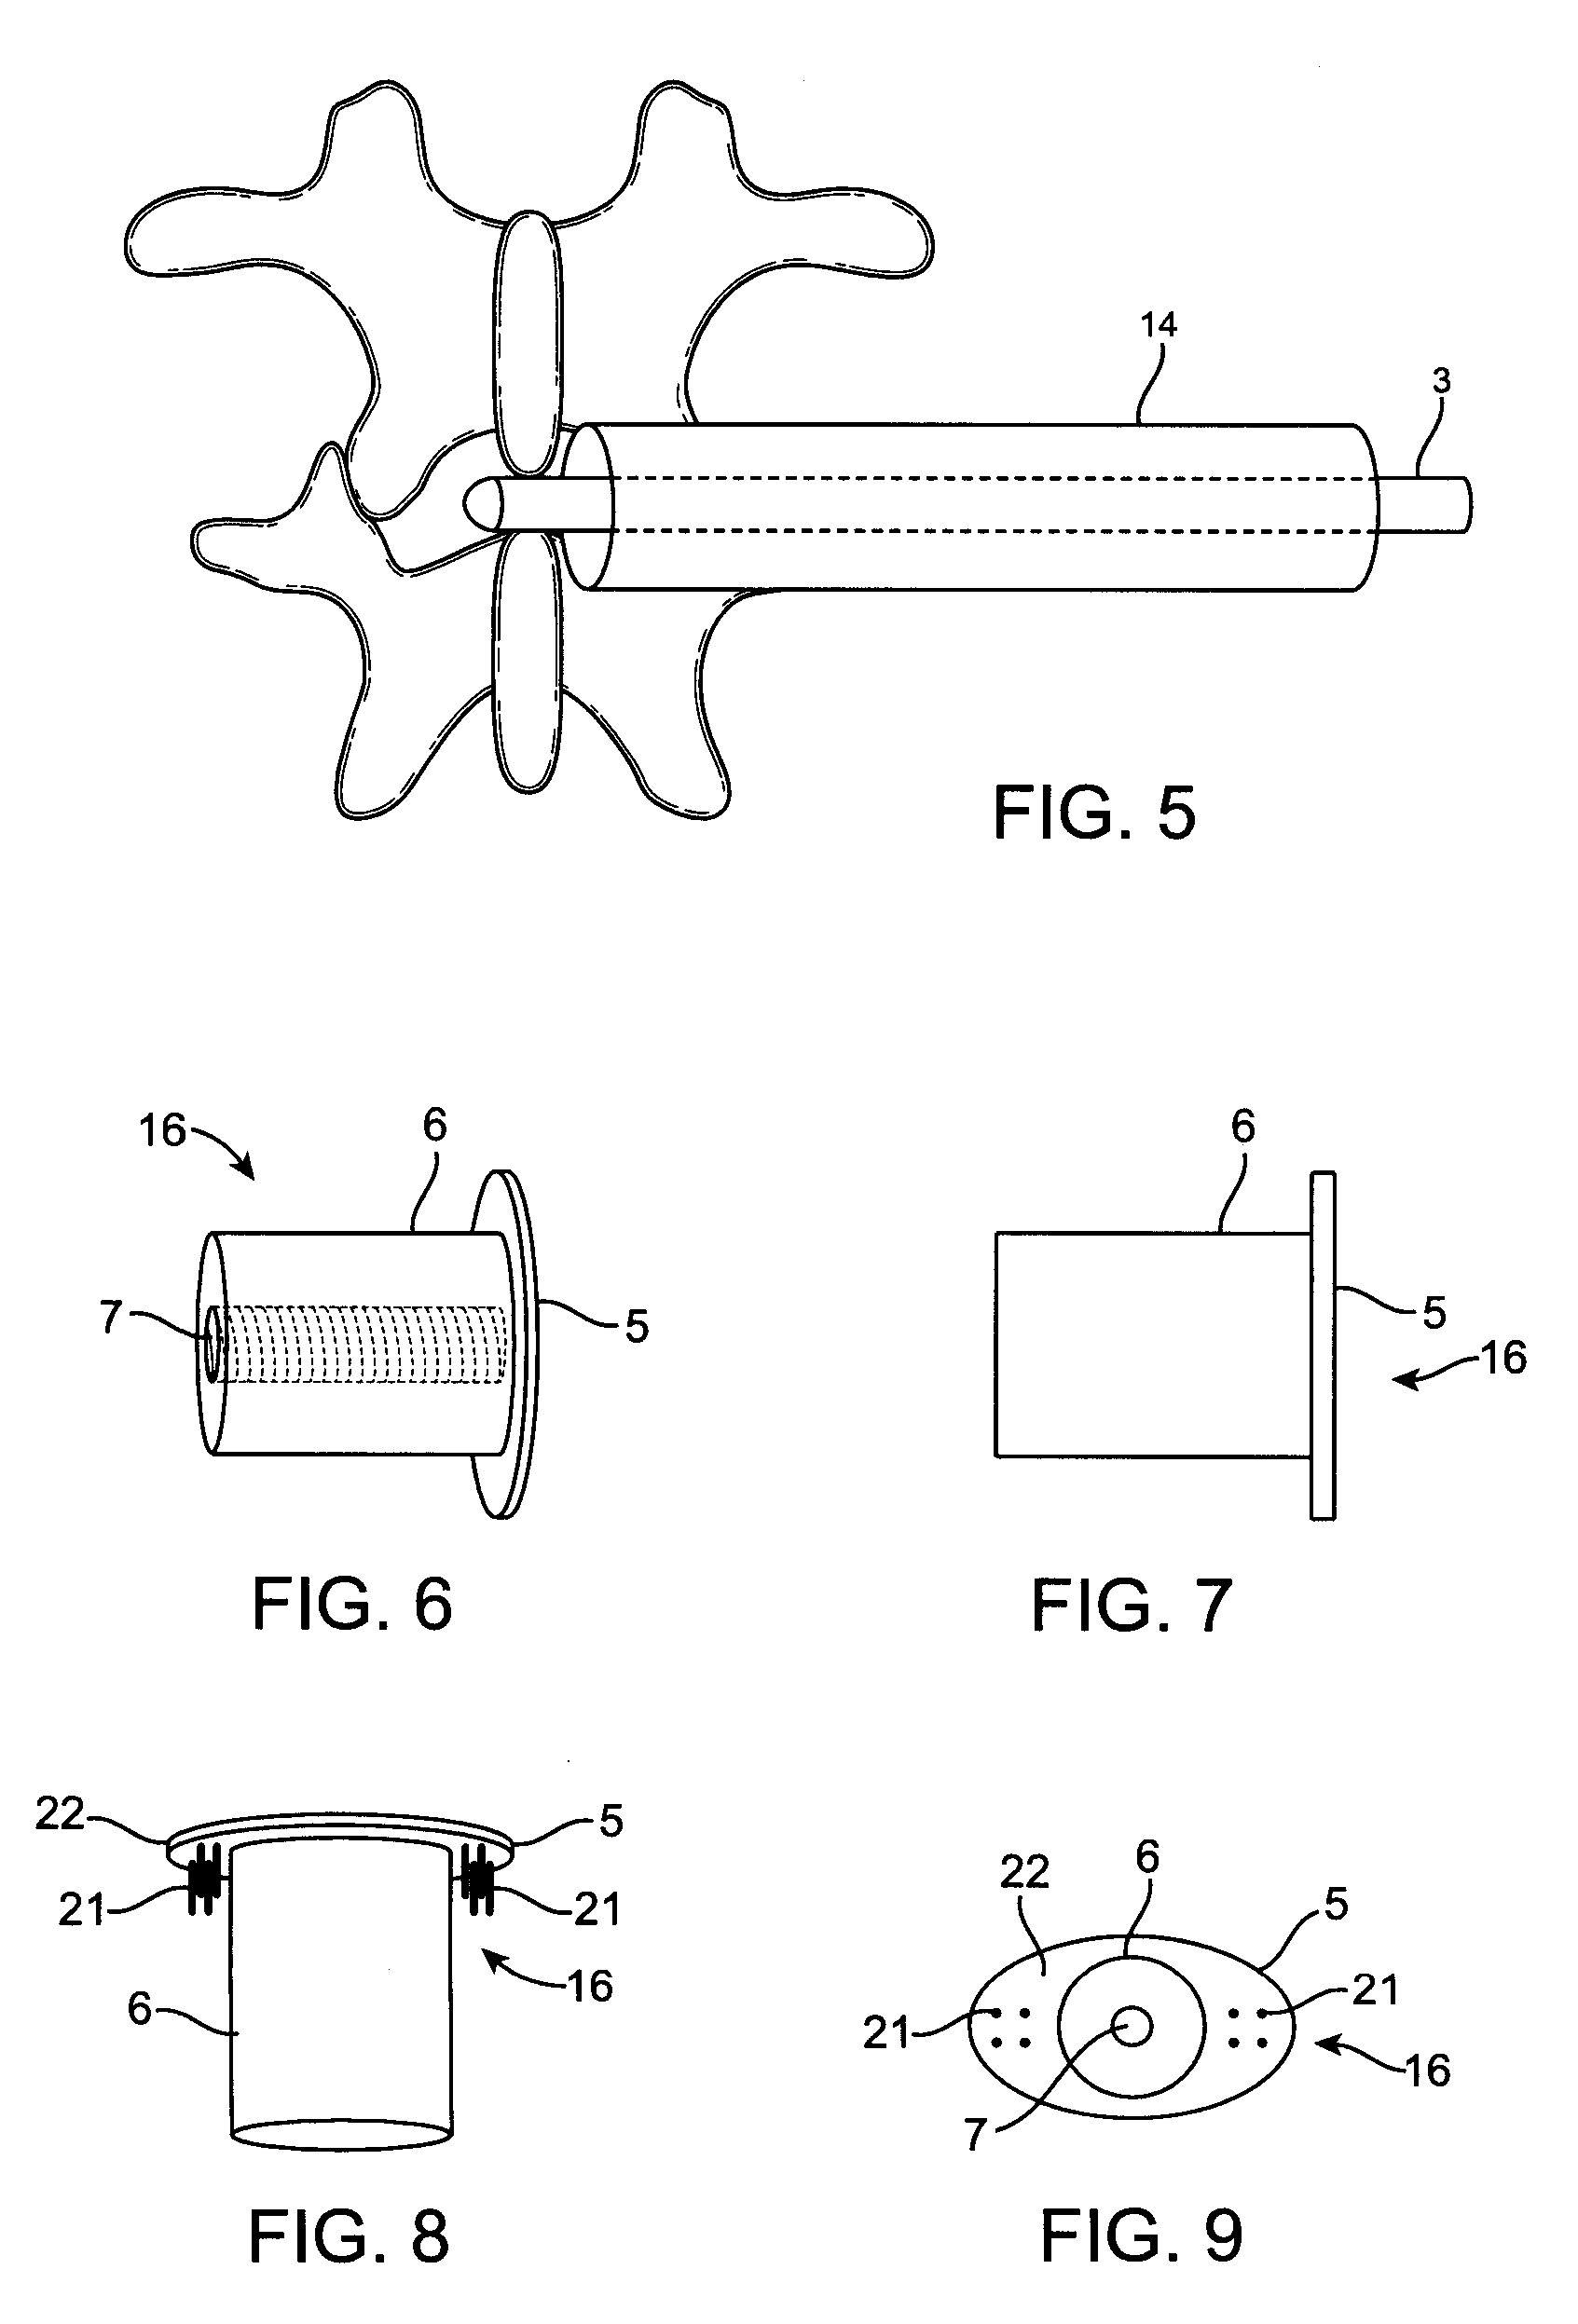 Implant device and method for interspinous distraction